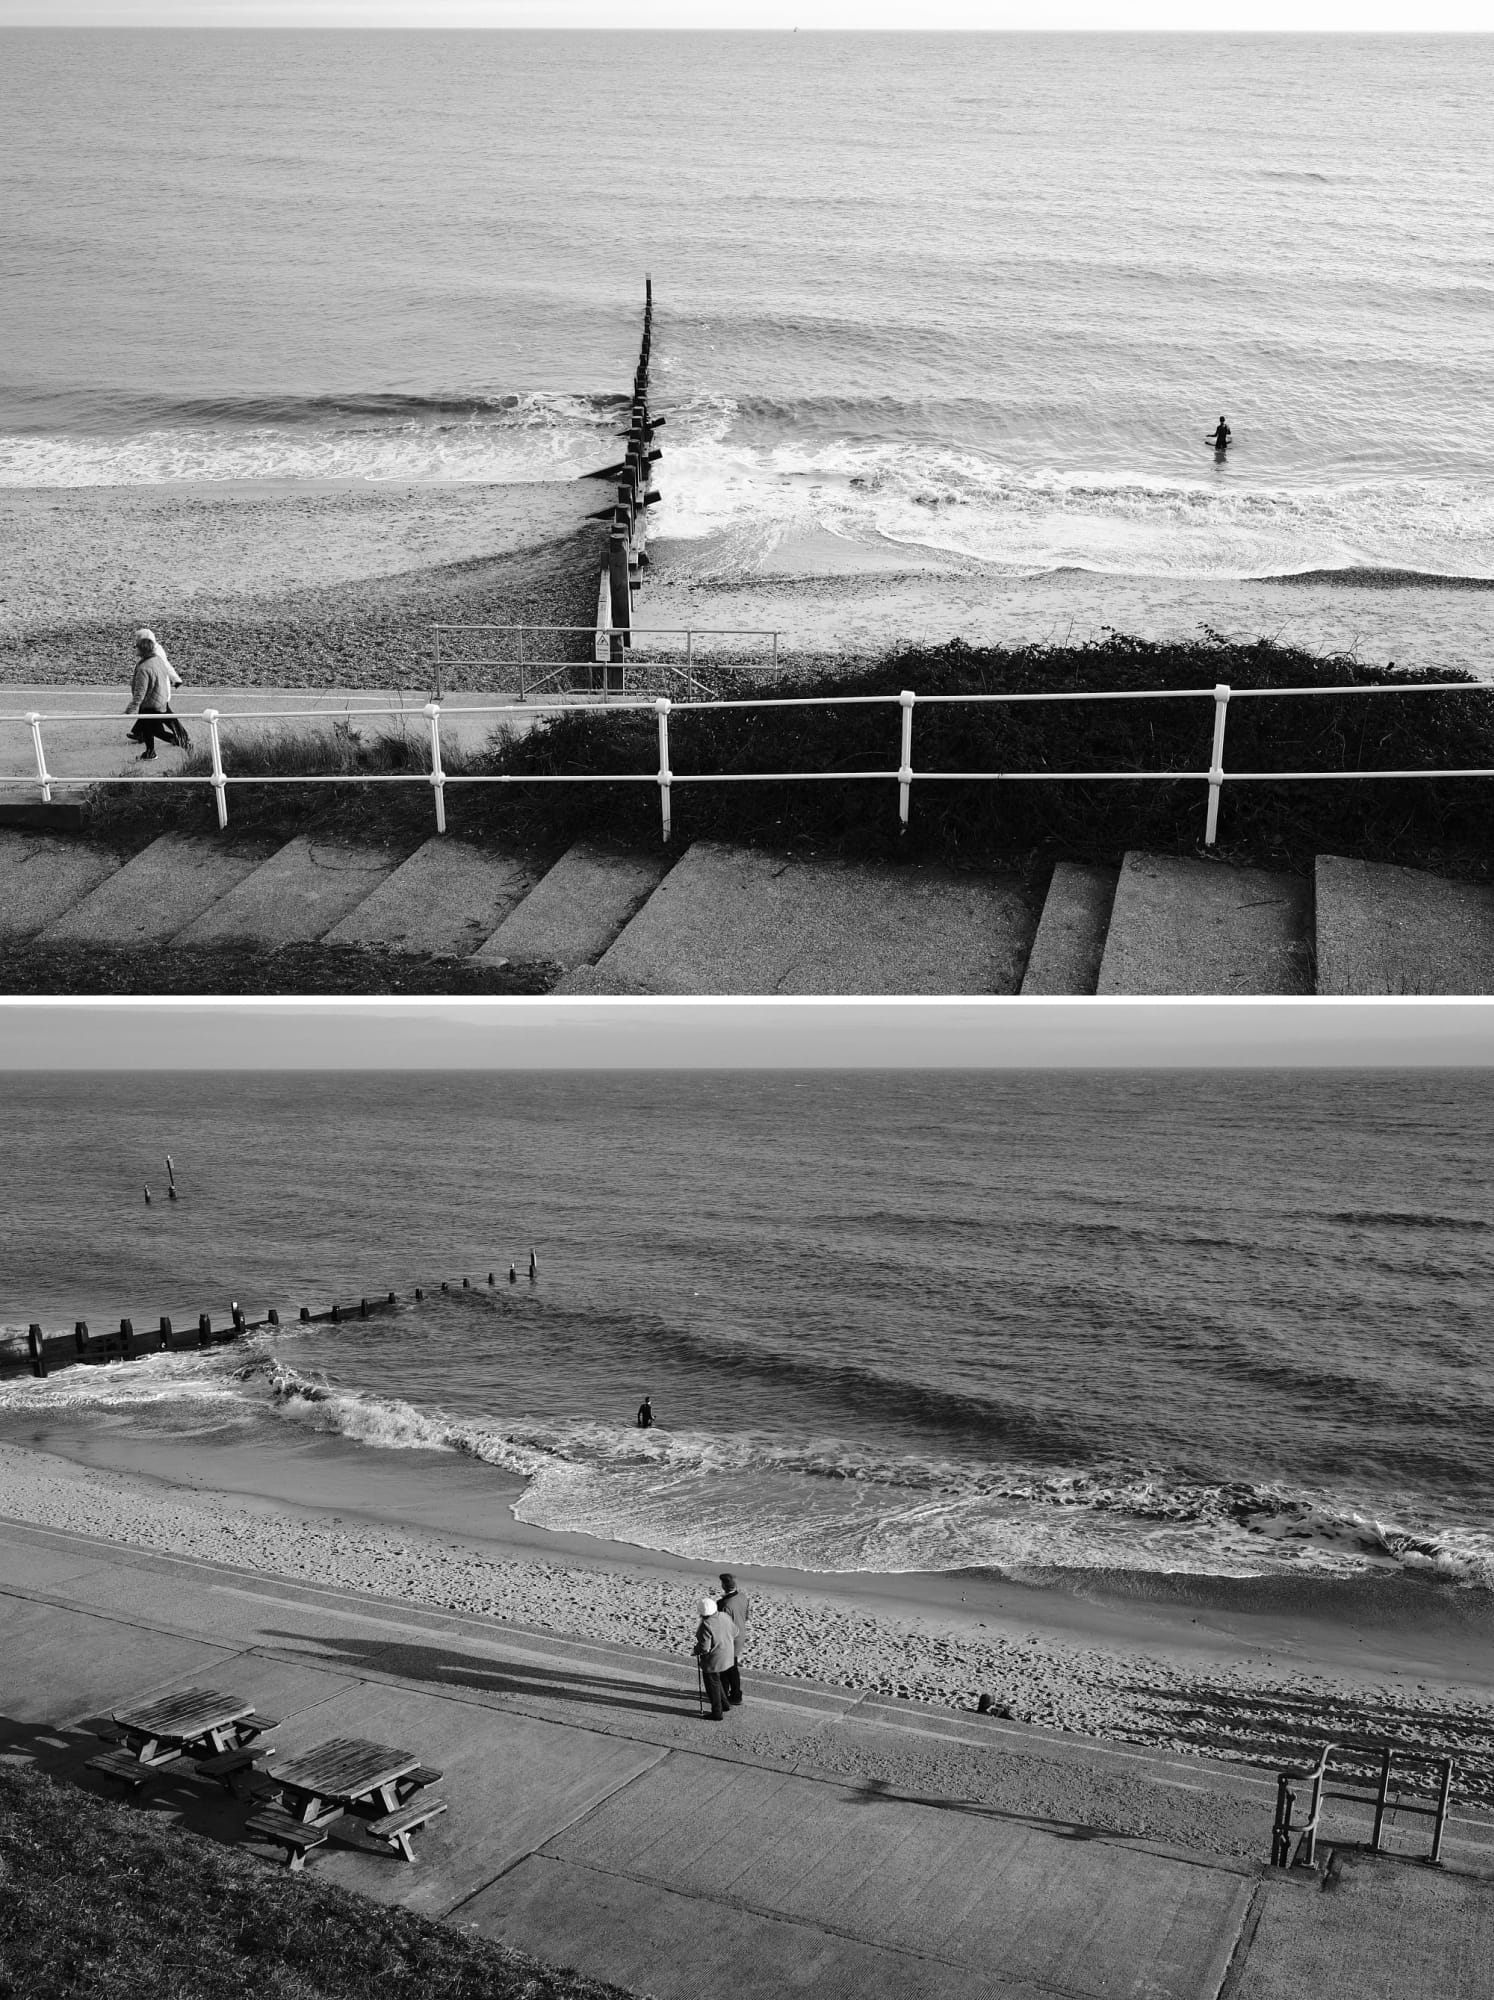 surfer and couple on the seafront / various people on the seafront